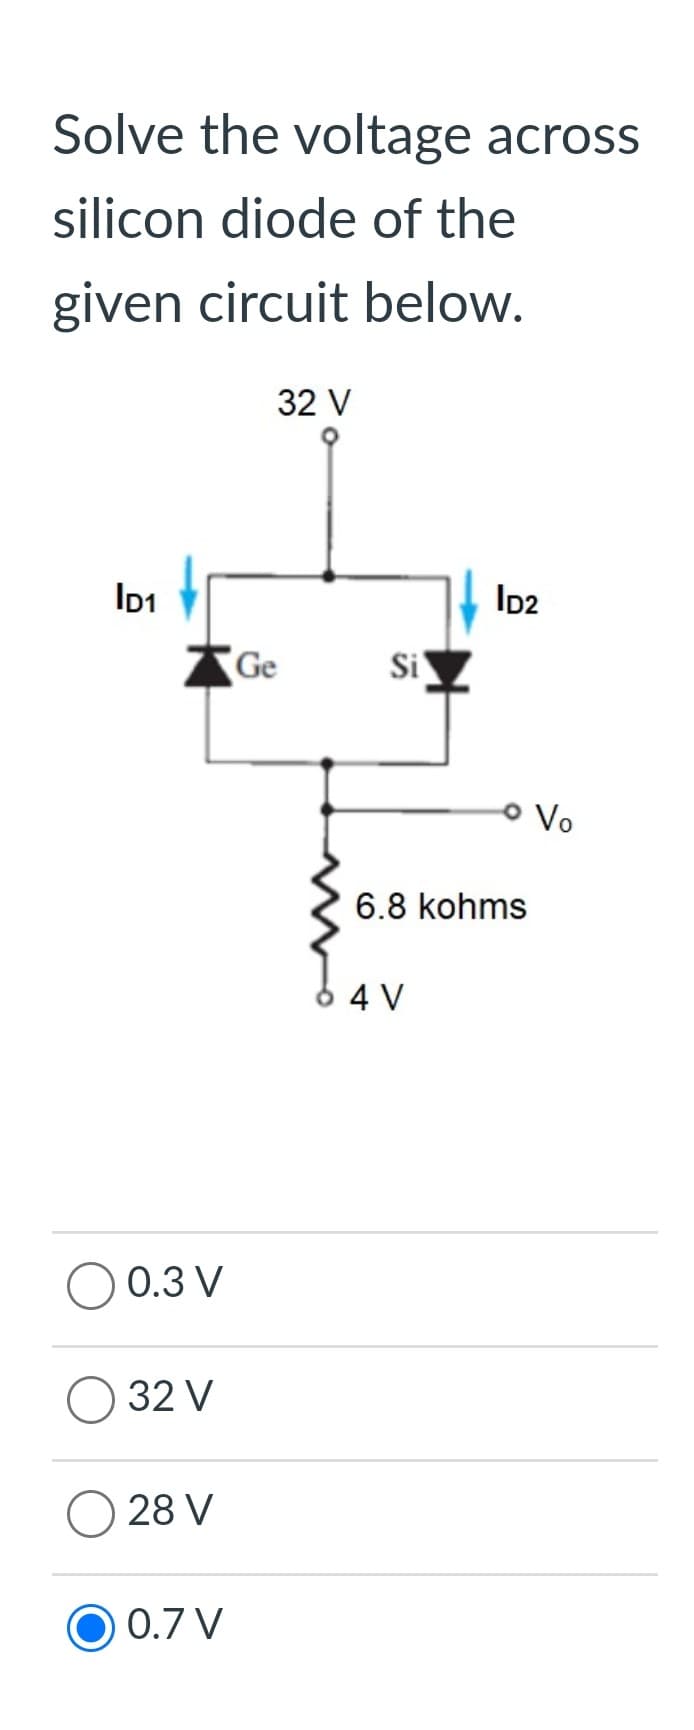 Solve the voltage across
silicon diode of the
given circuit below.
ID1
9
0.3 V
32 V
28 V
O 0.7 V
32 V
Ge
Si
ID2
ន
8 4 V
> Vo
6.8 kohms